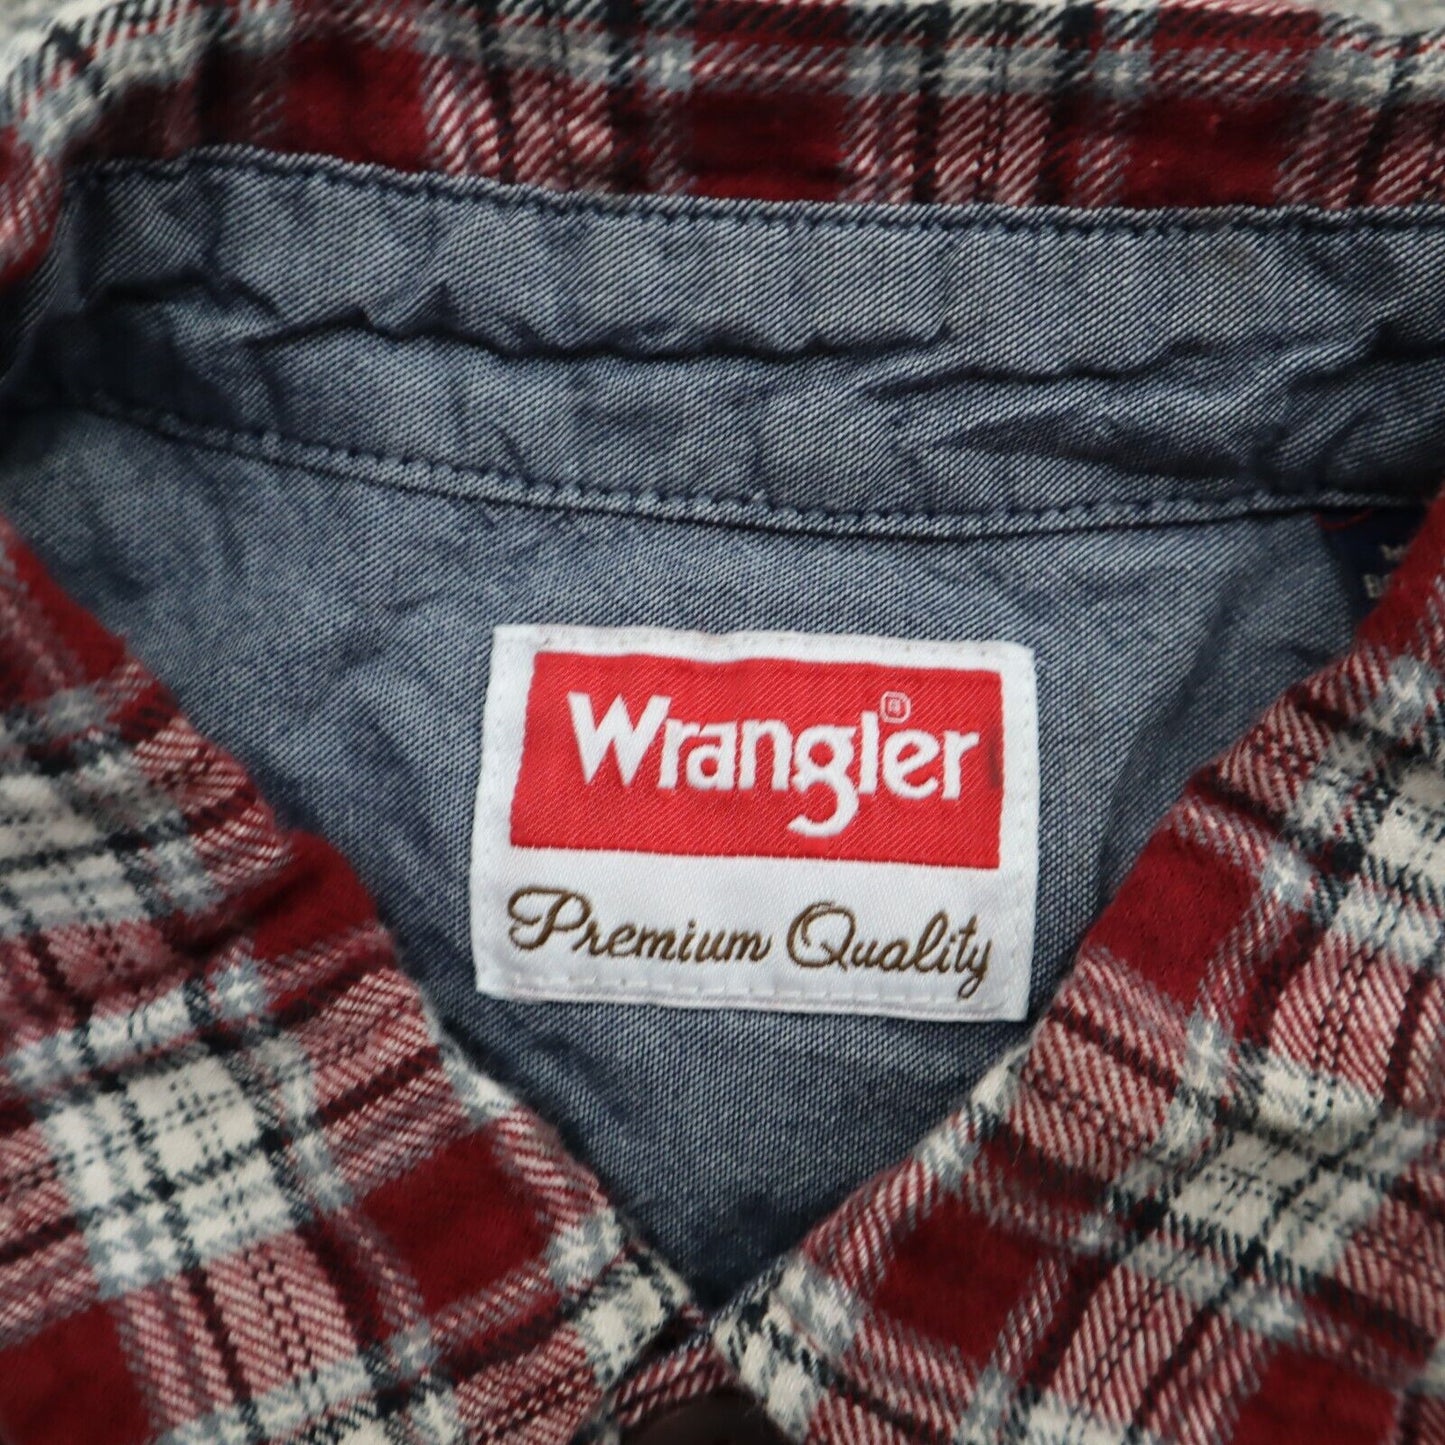 Wrangler Men Button Up Plaid Shirt 100%Cotton Long Sleeve Red White Size Large